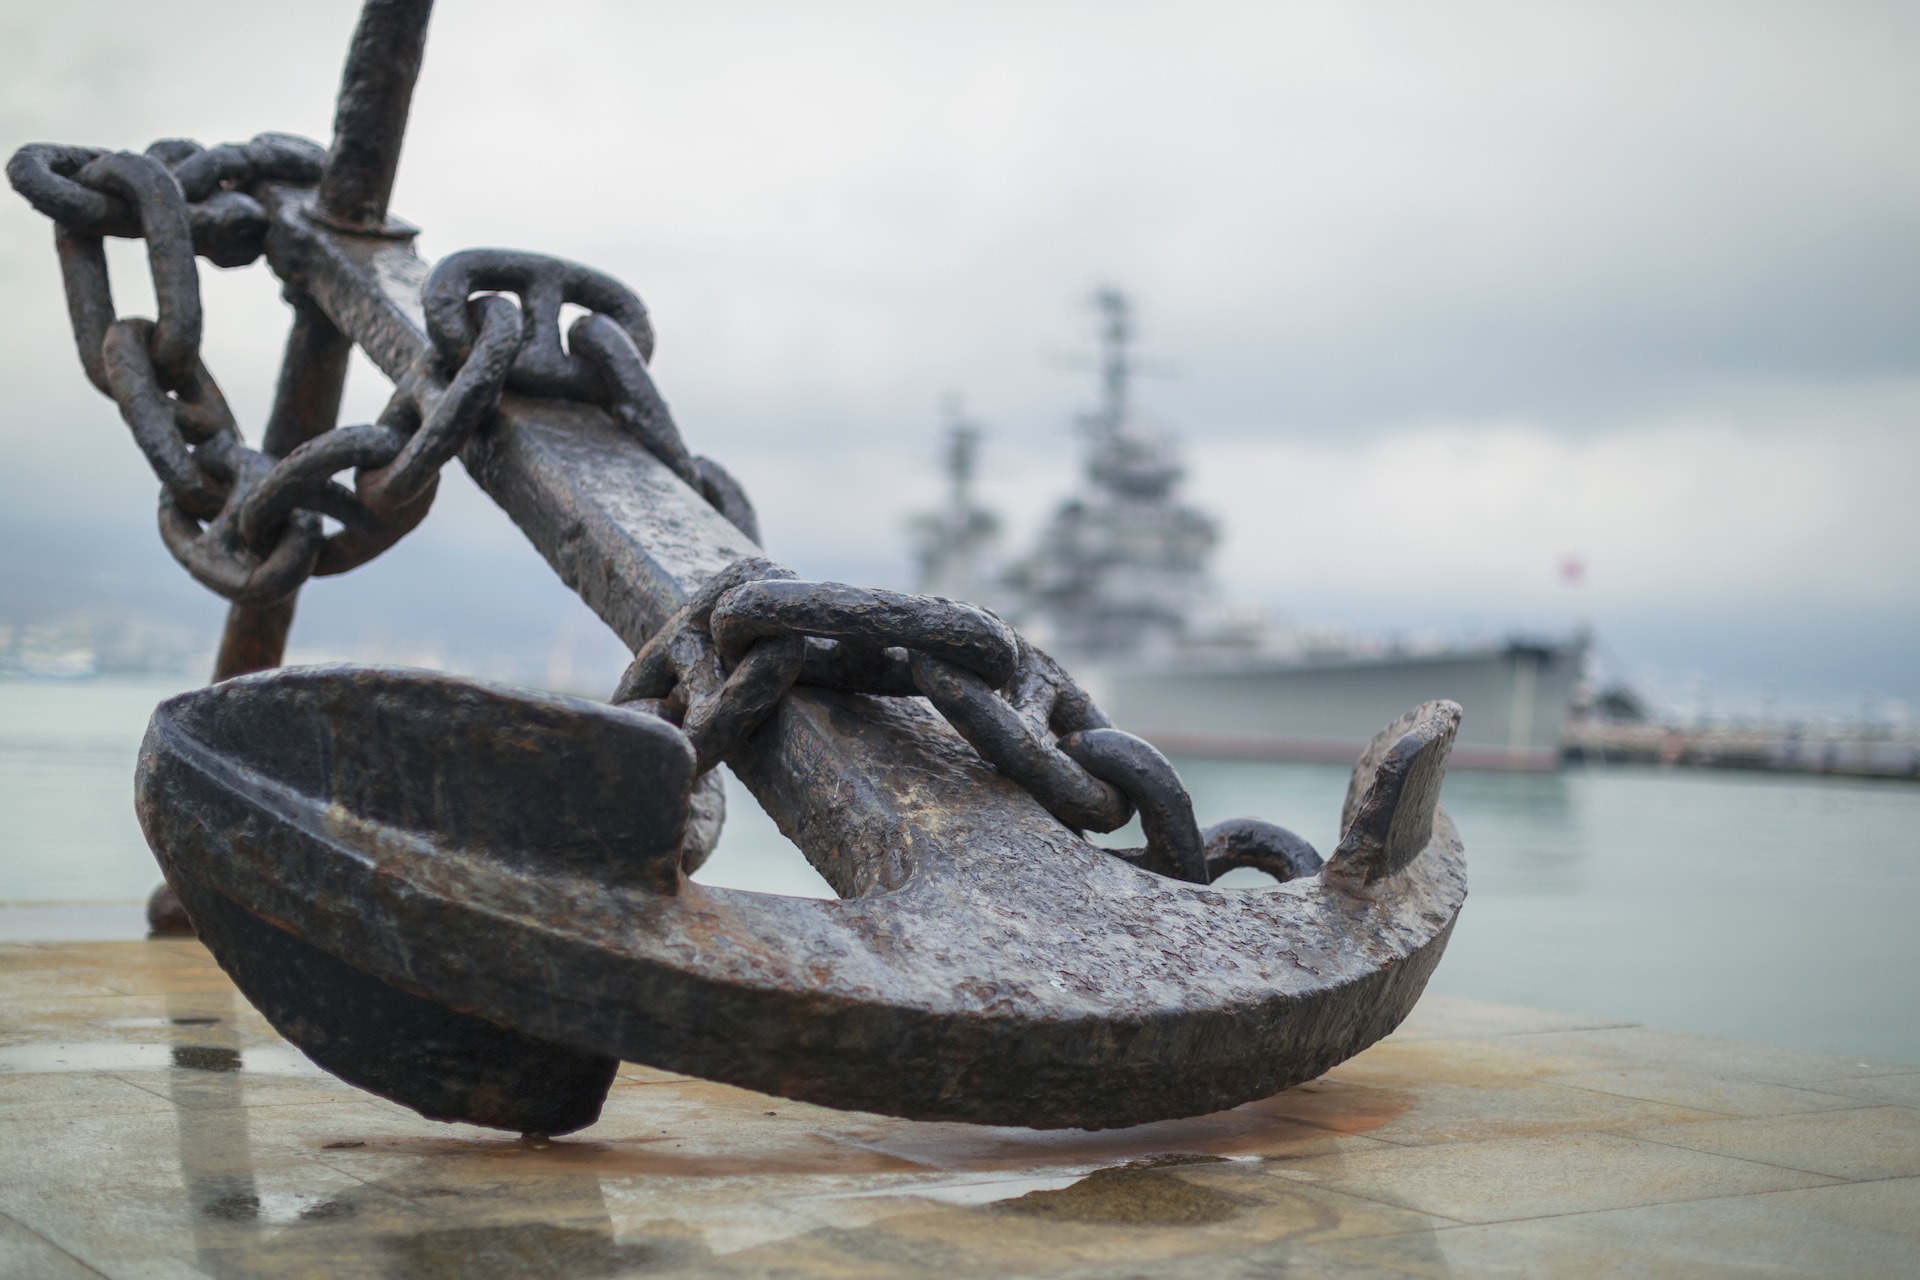 Tales of a Technician: Anchors Away! Beware your Biases